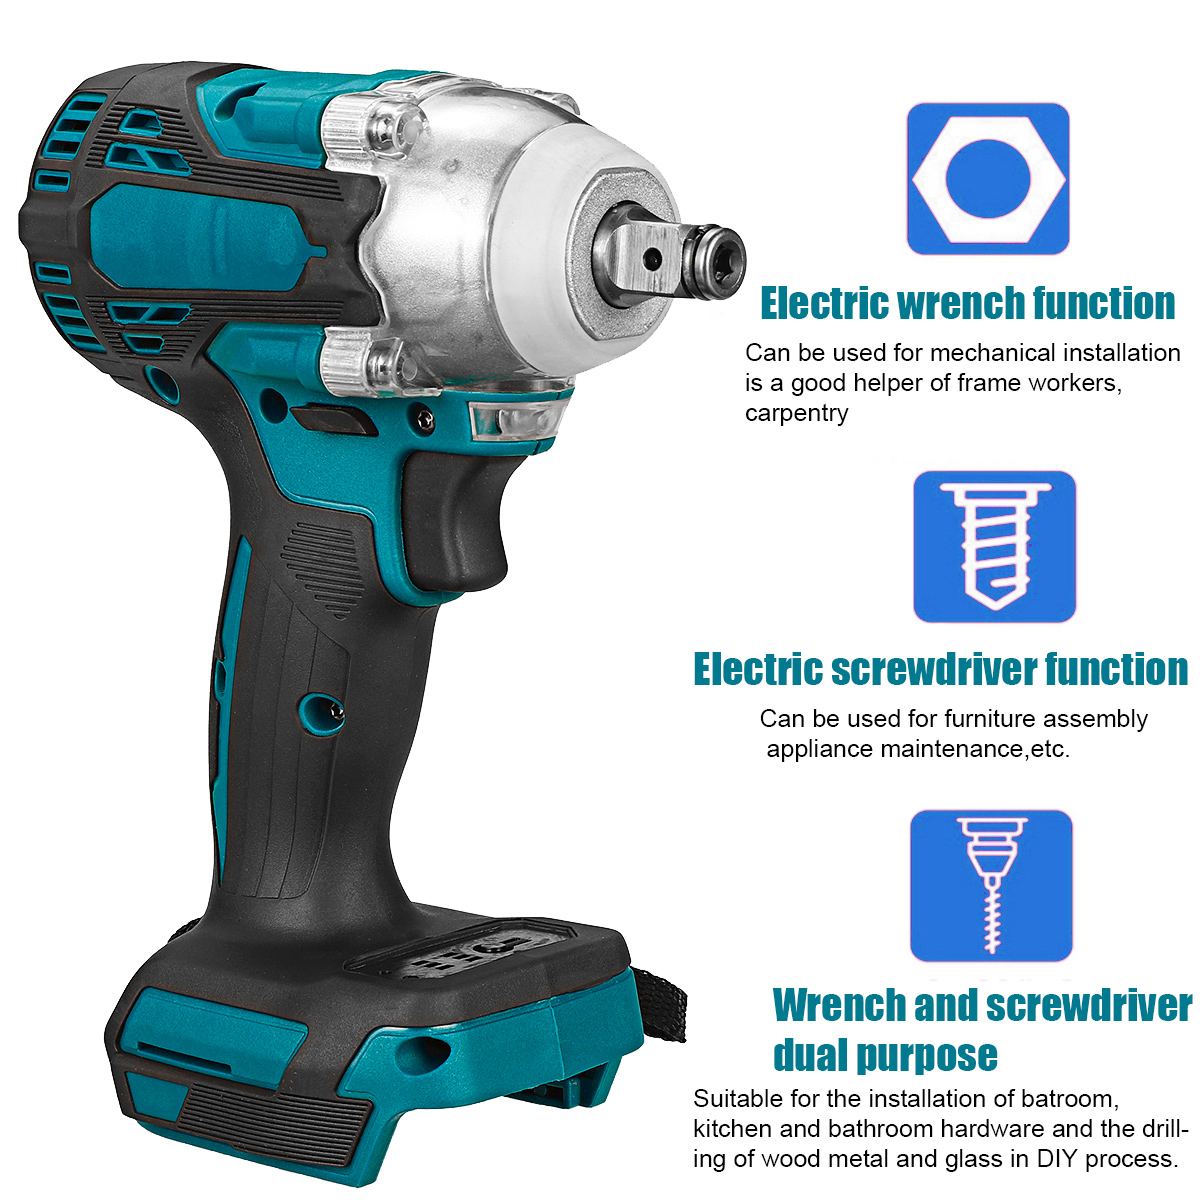 125mm-Cordless-Brushless-Impact-Wrench-Drill-Drive-Screwdriver-Power-Tool-For-Makita-18V-battery-1855969-4